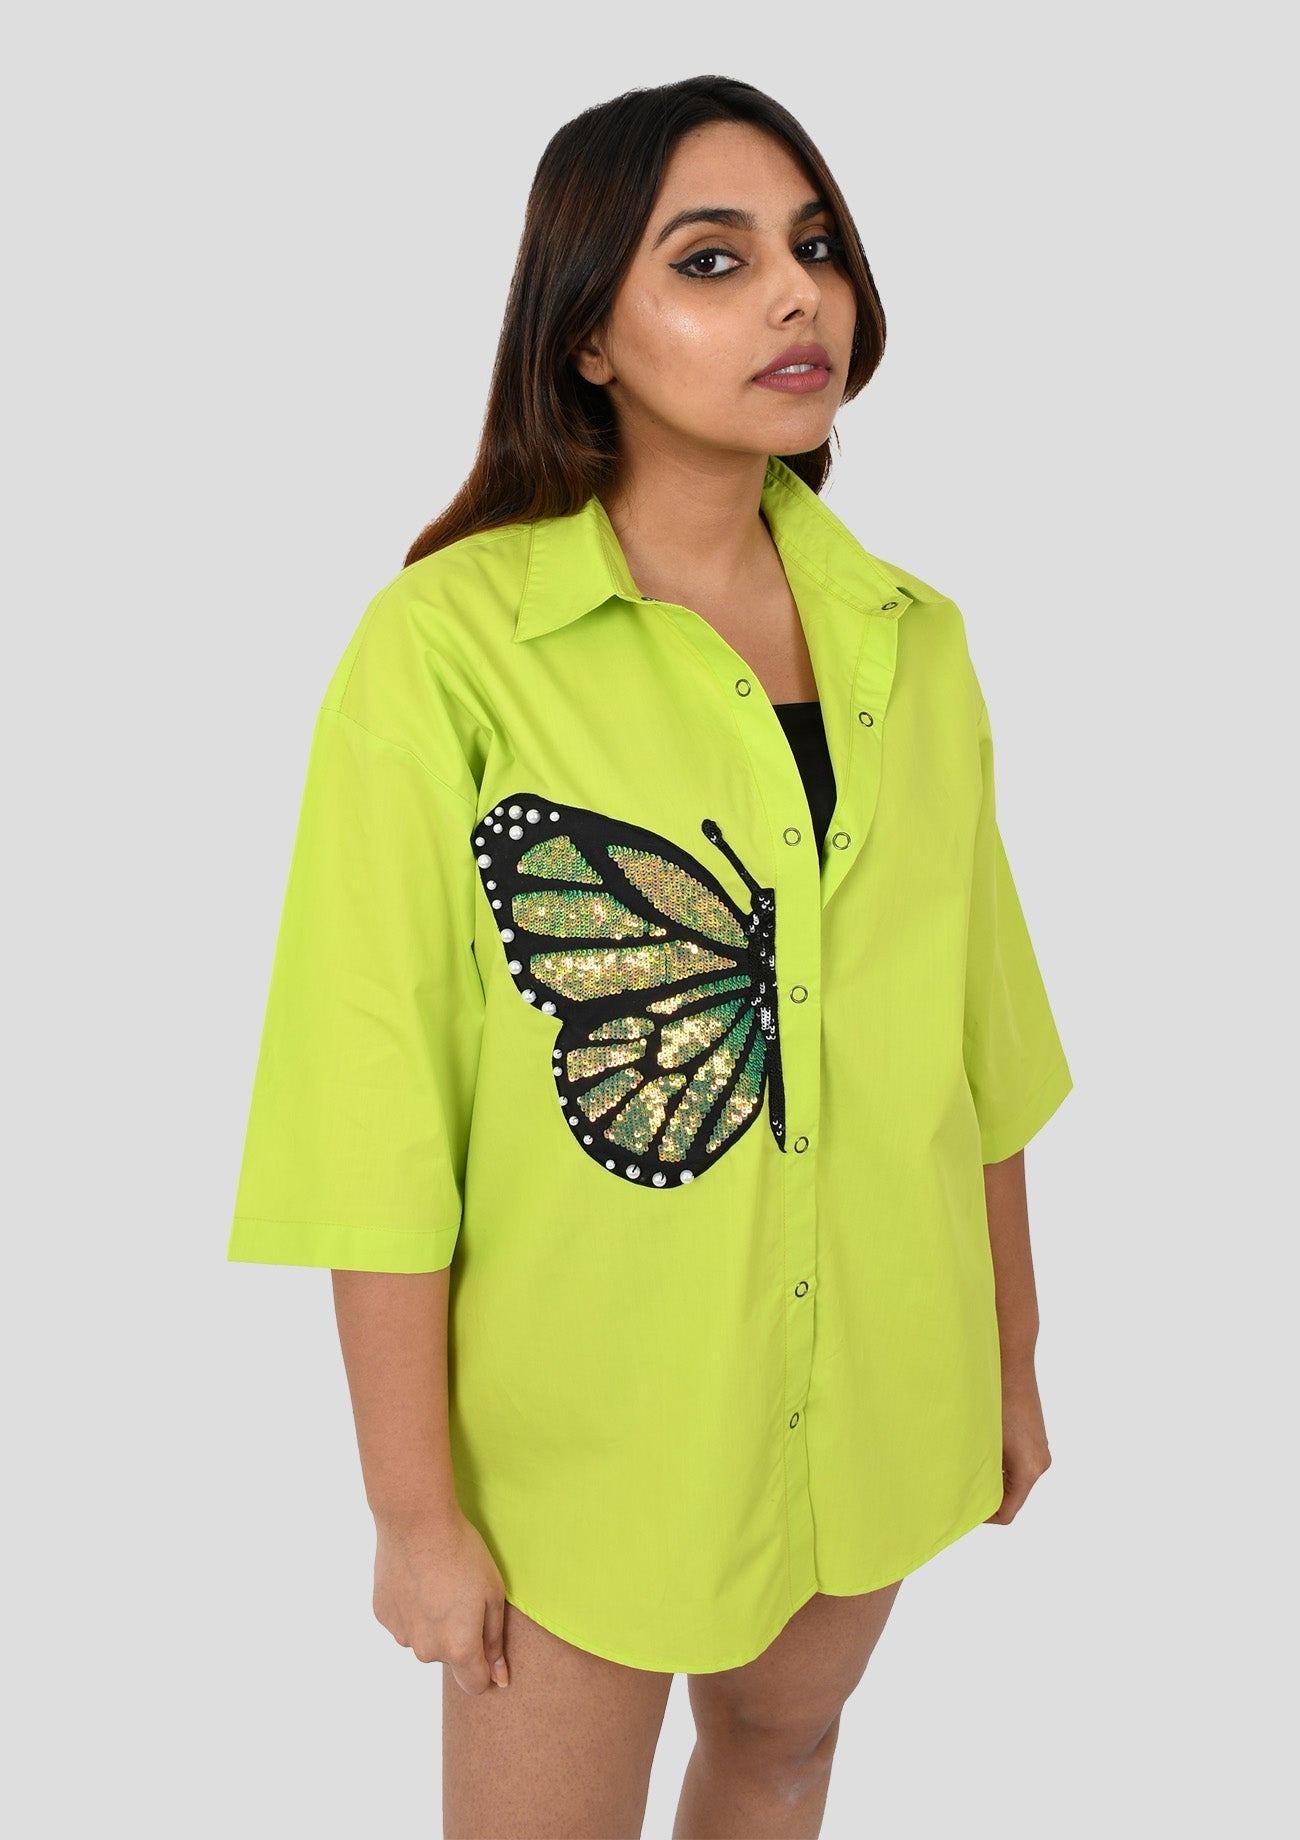 Neon Green Cotton Shirt With Green Sequins Butterfly Embroidery